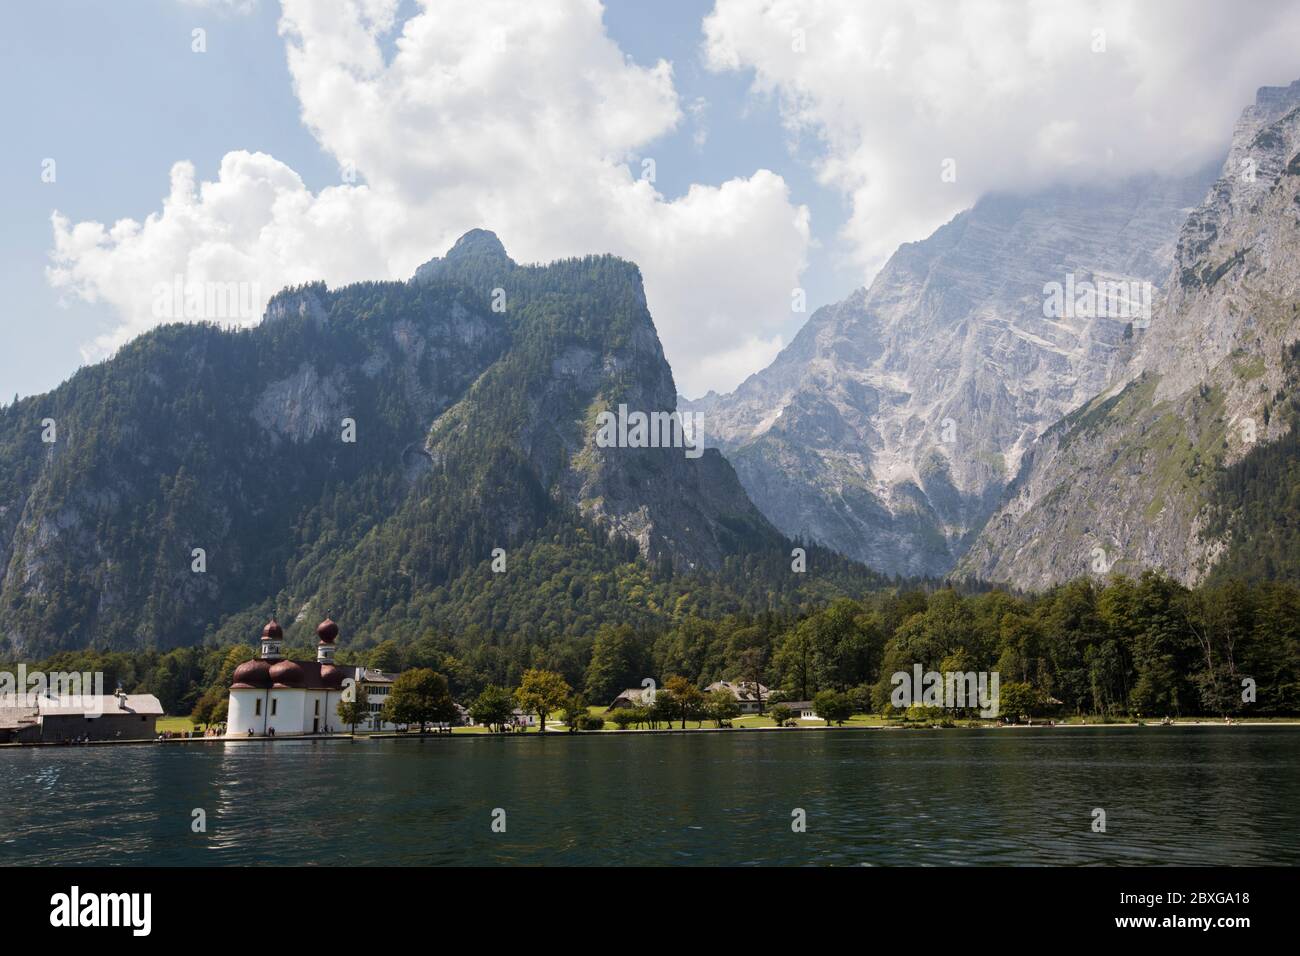 Konigssee lake and mountains in summer, Bavaria, Germany Stock Photo